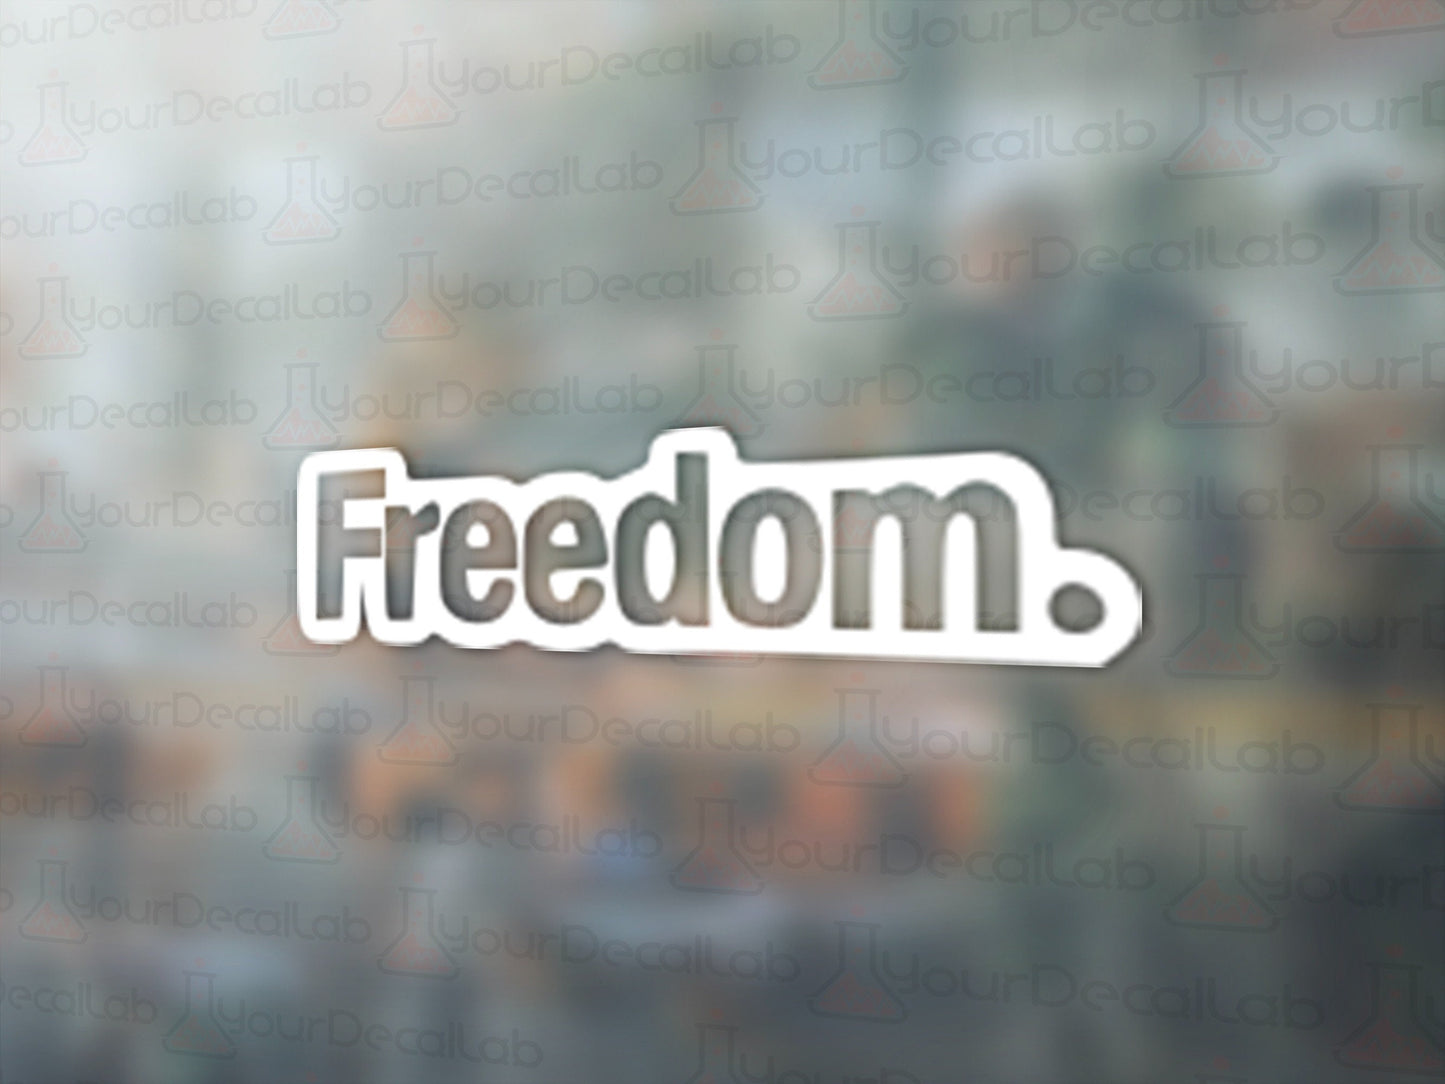 Freedom. Decal - Many Colors & Sizes